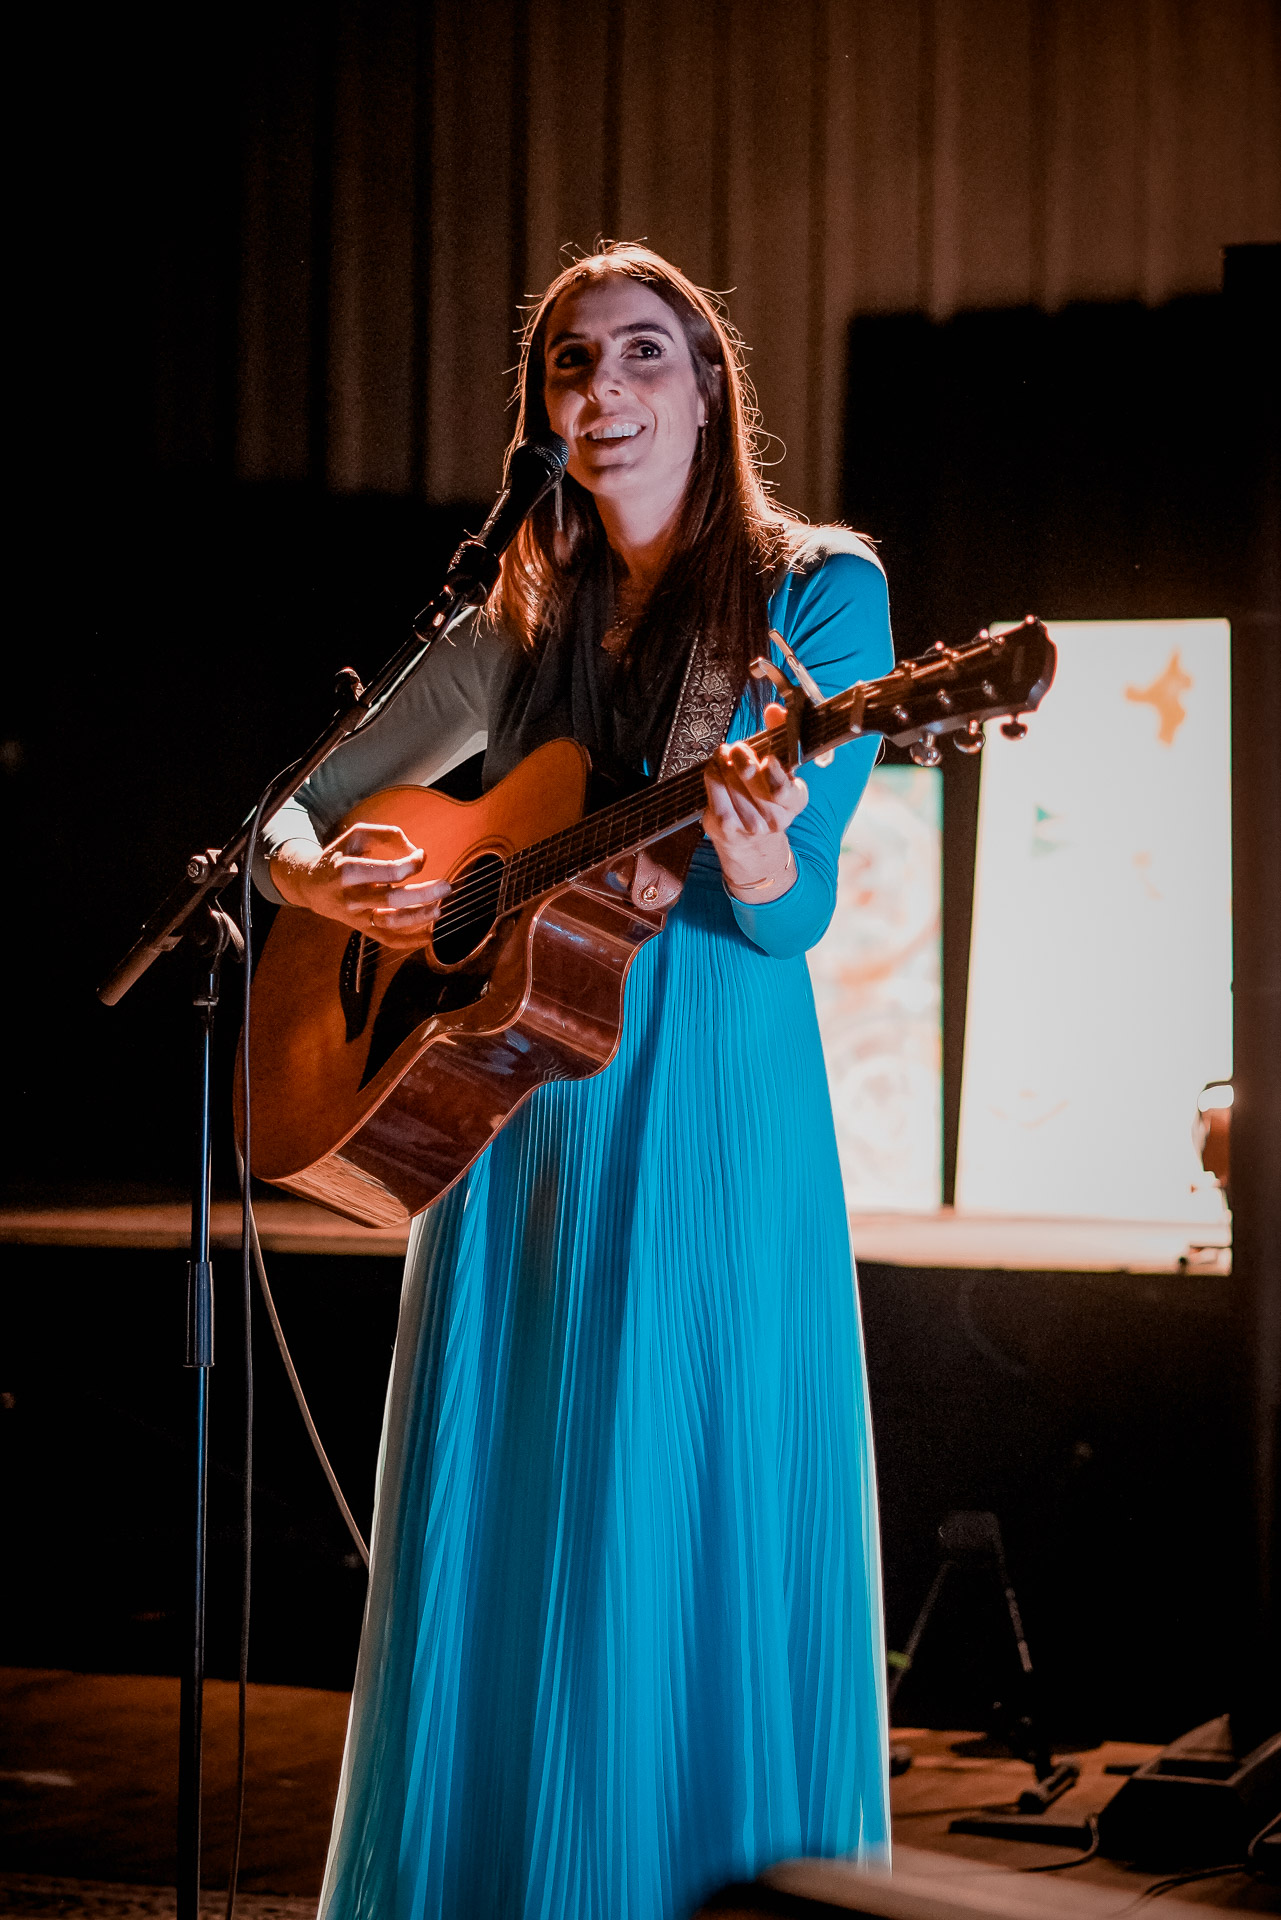 A portrait of a woman singing and playing guitar